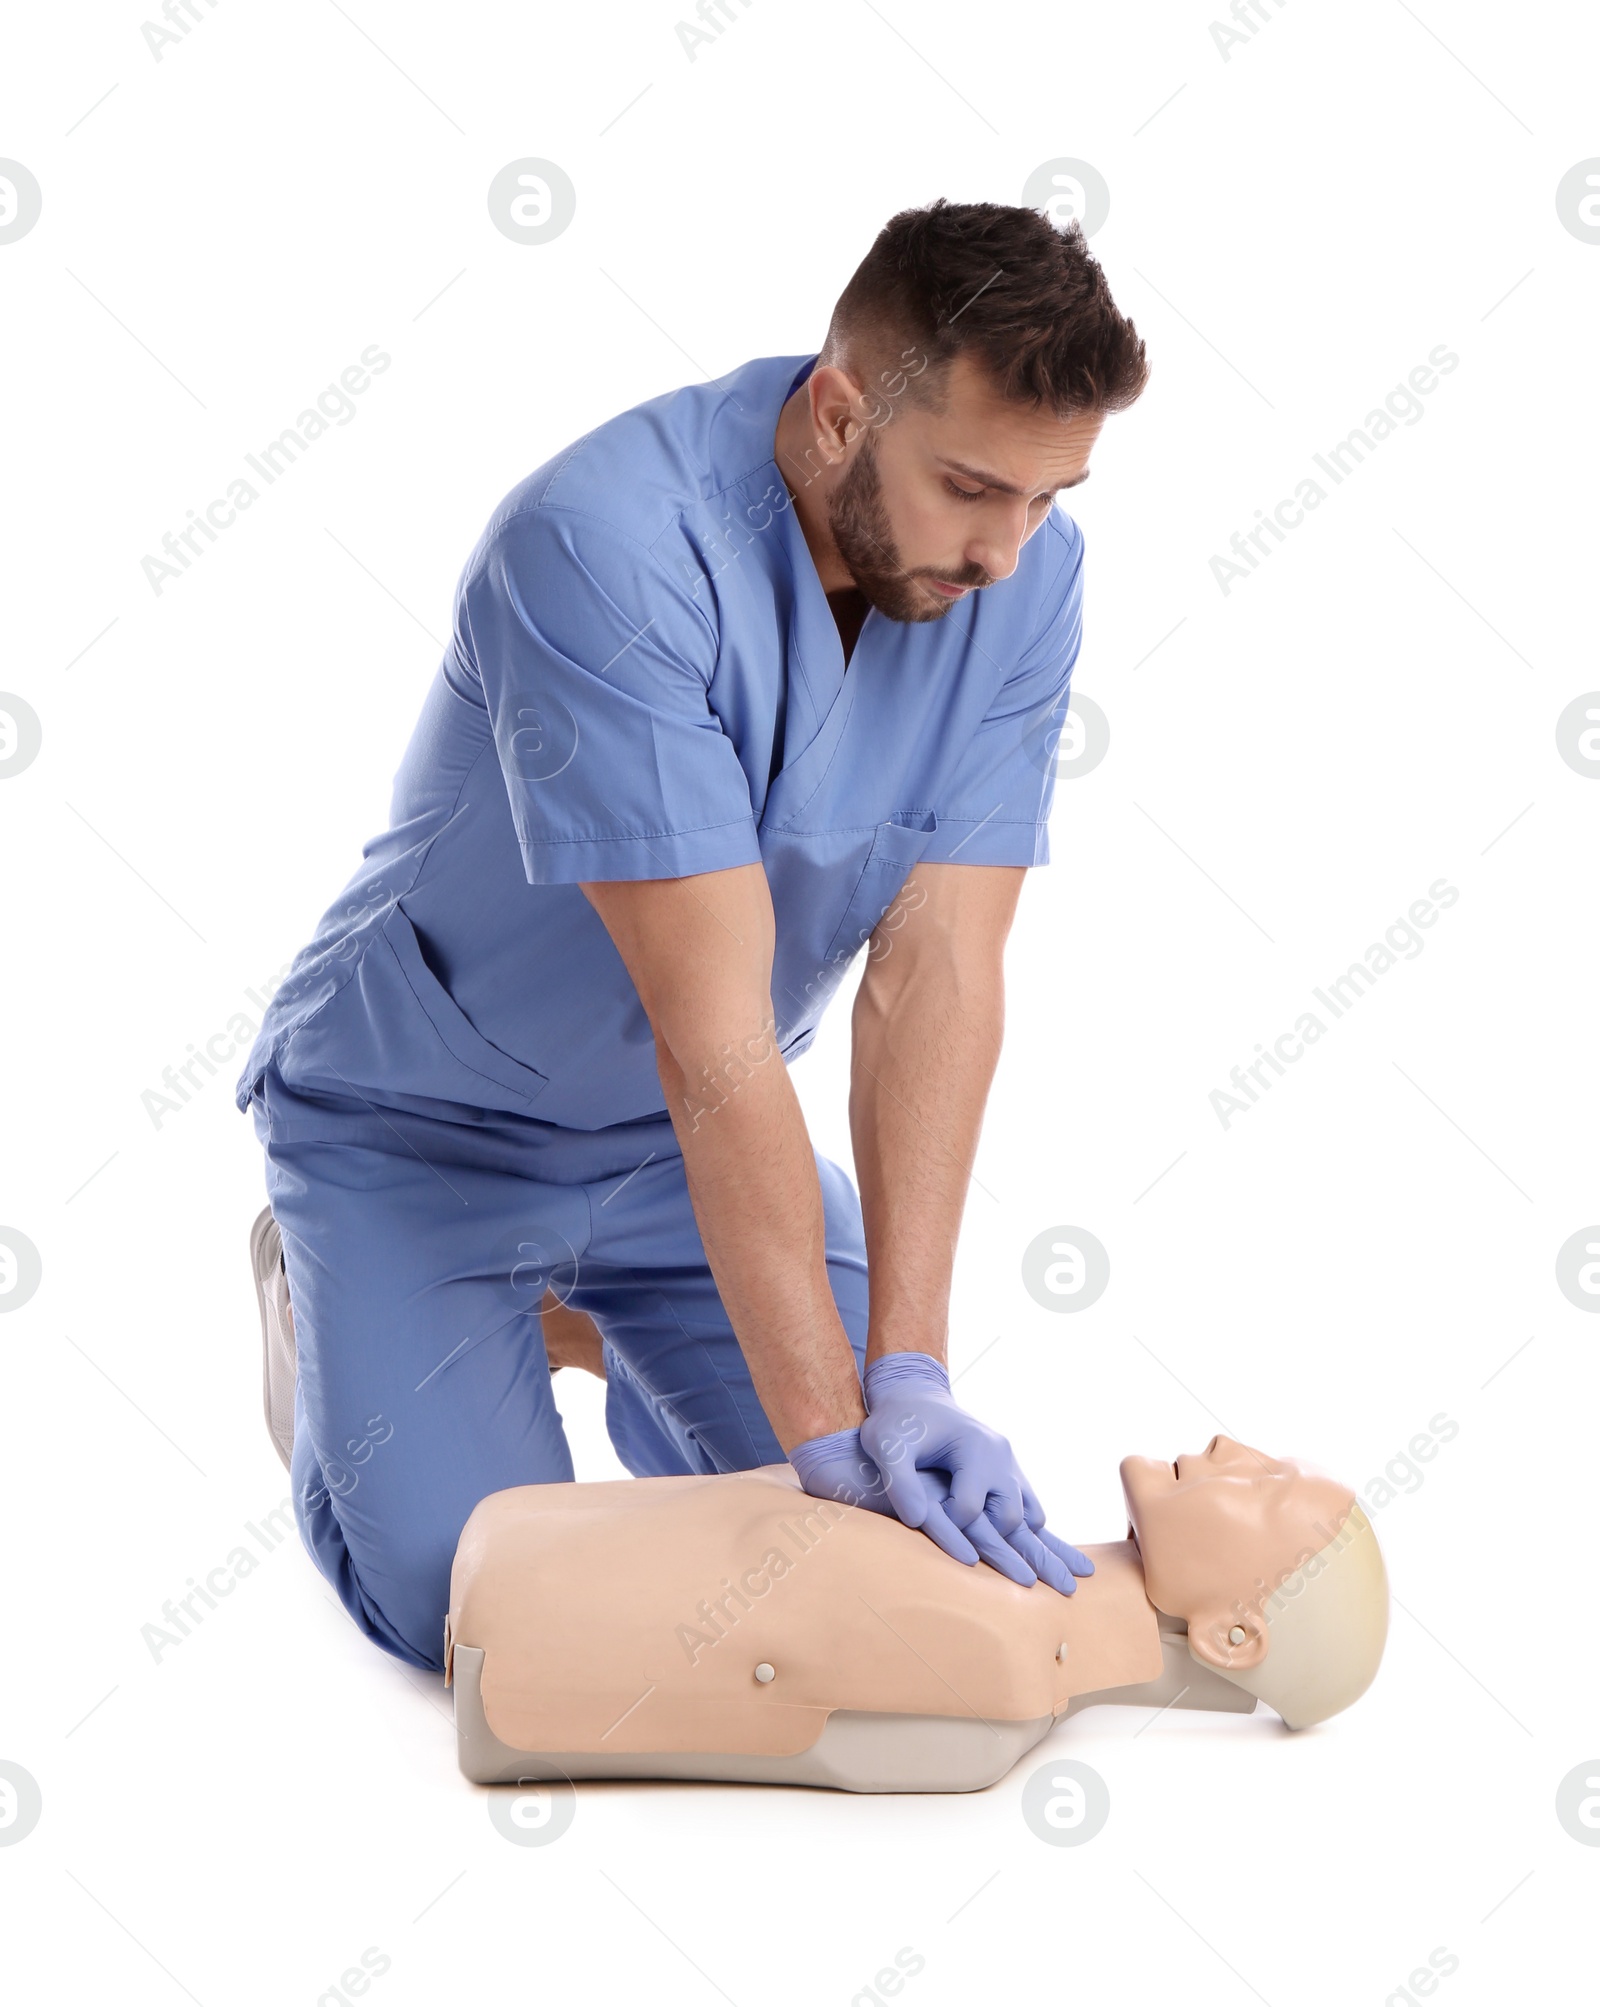 Photo of Doctor in uniform practicing first aid on mannequin against white background